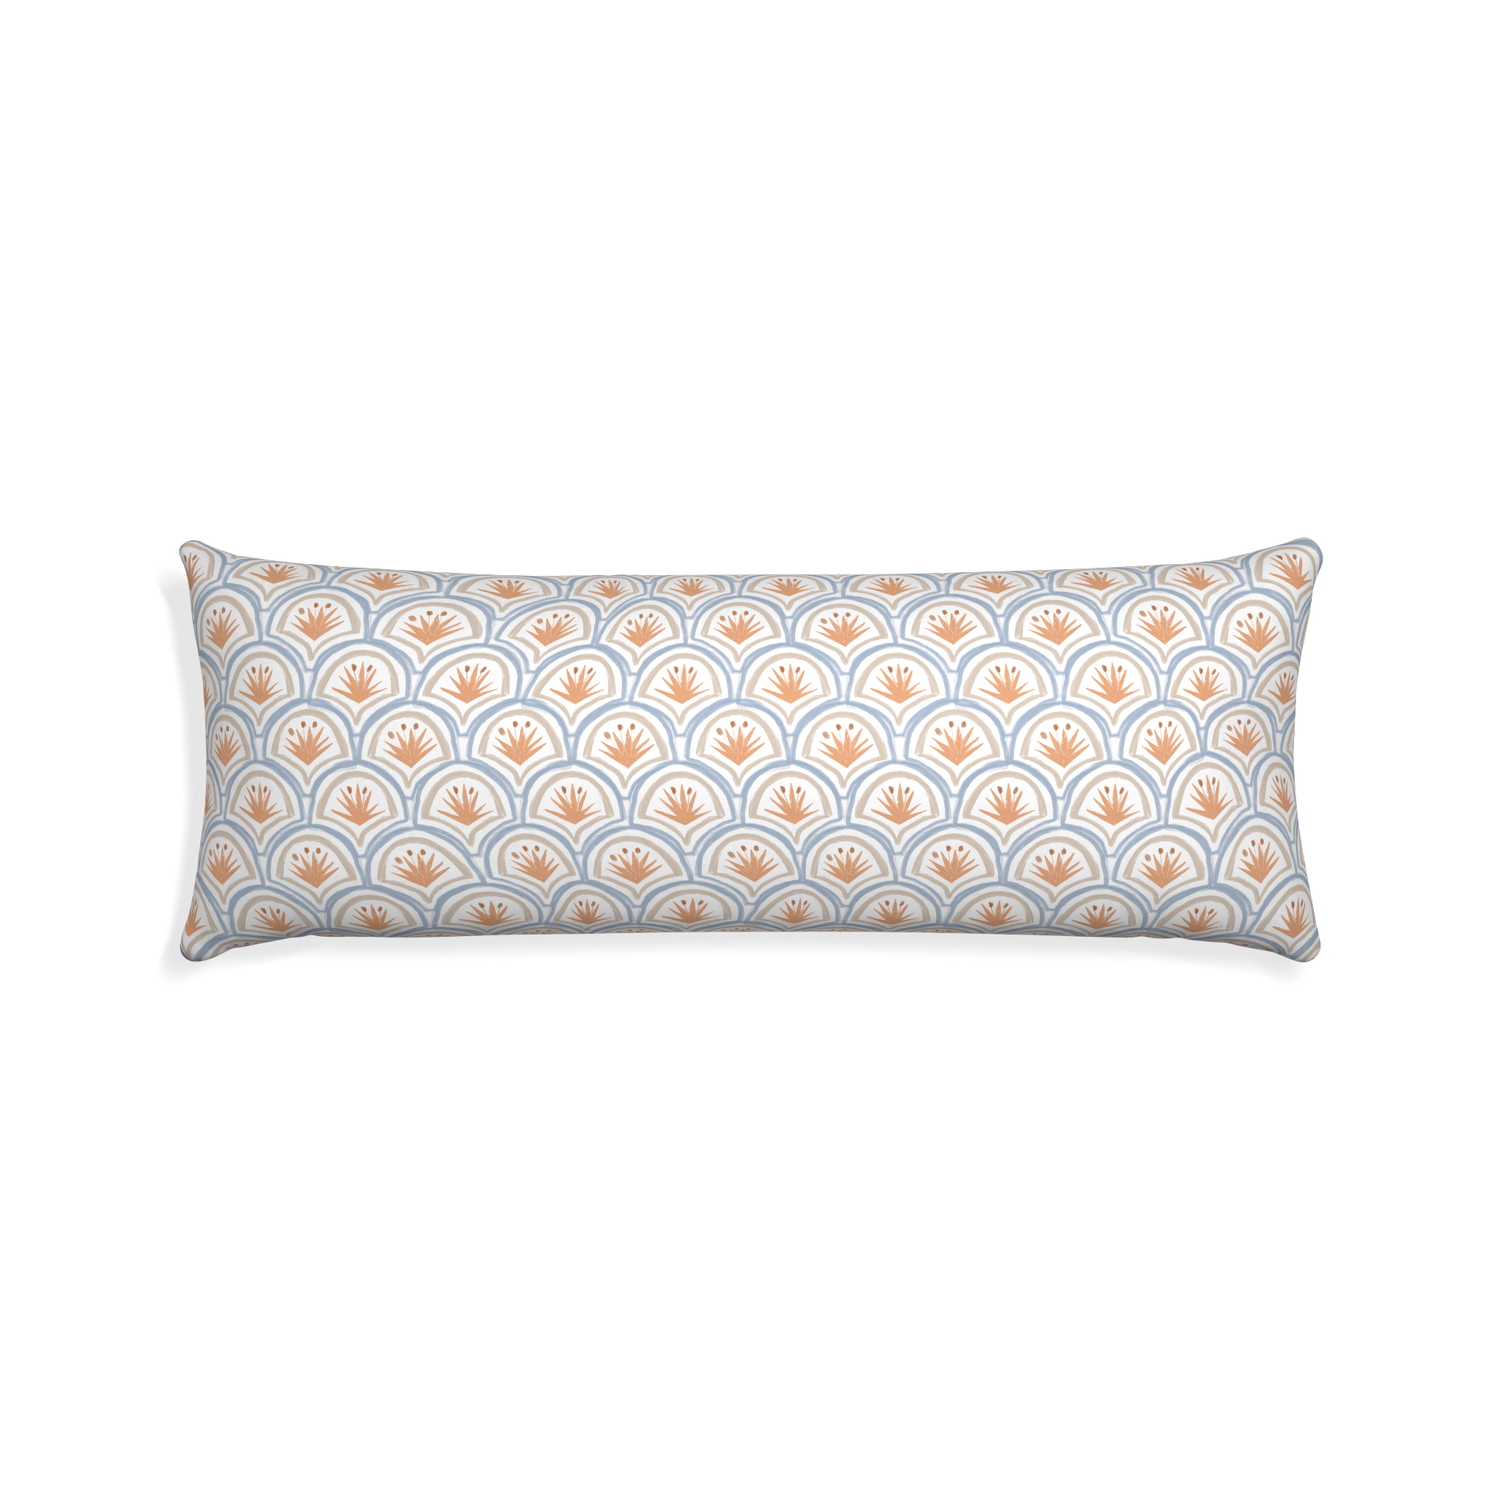 Xl-lumbar thatcher apricot custom pillow with none on white background